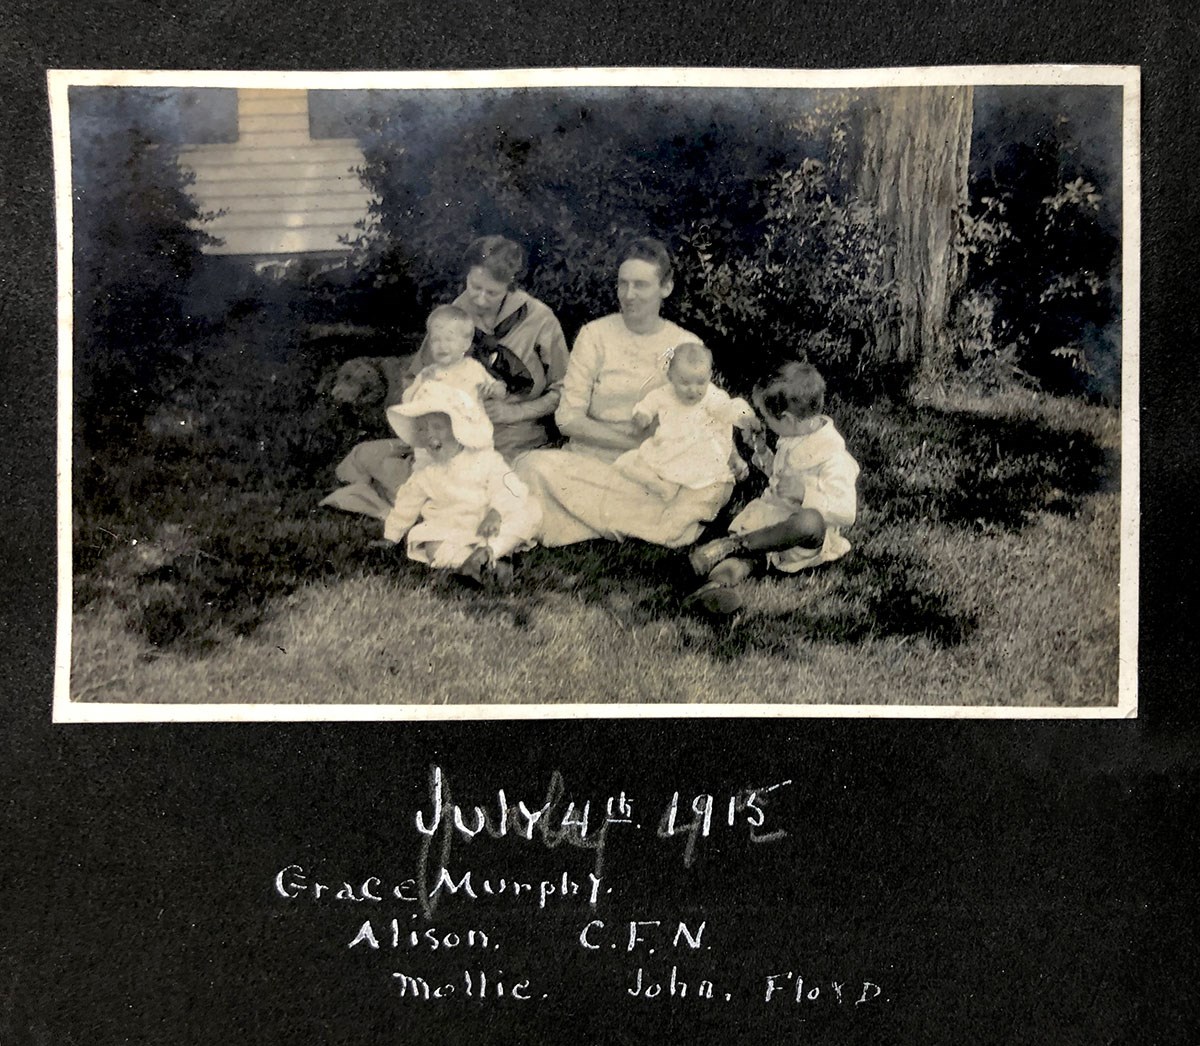 A black and white photograph depicts two women sitting with a group of children.